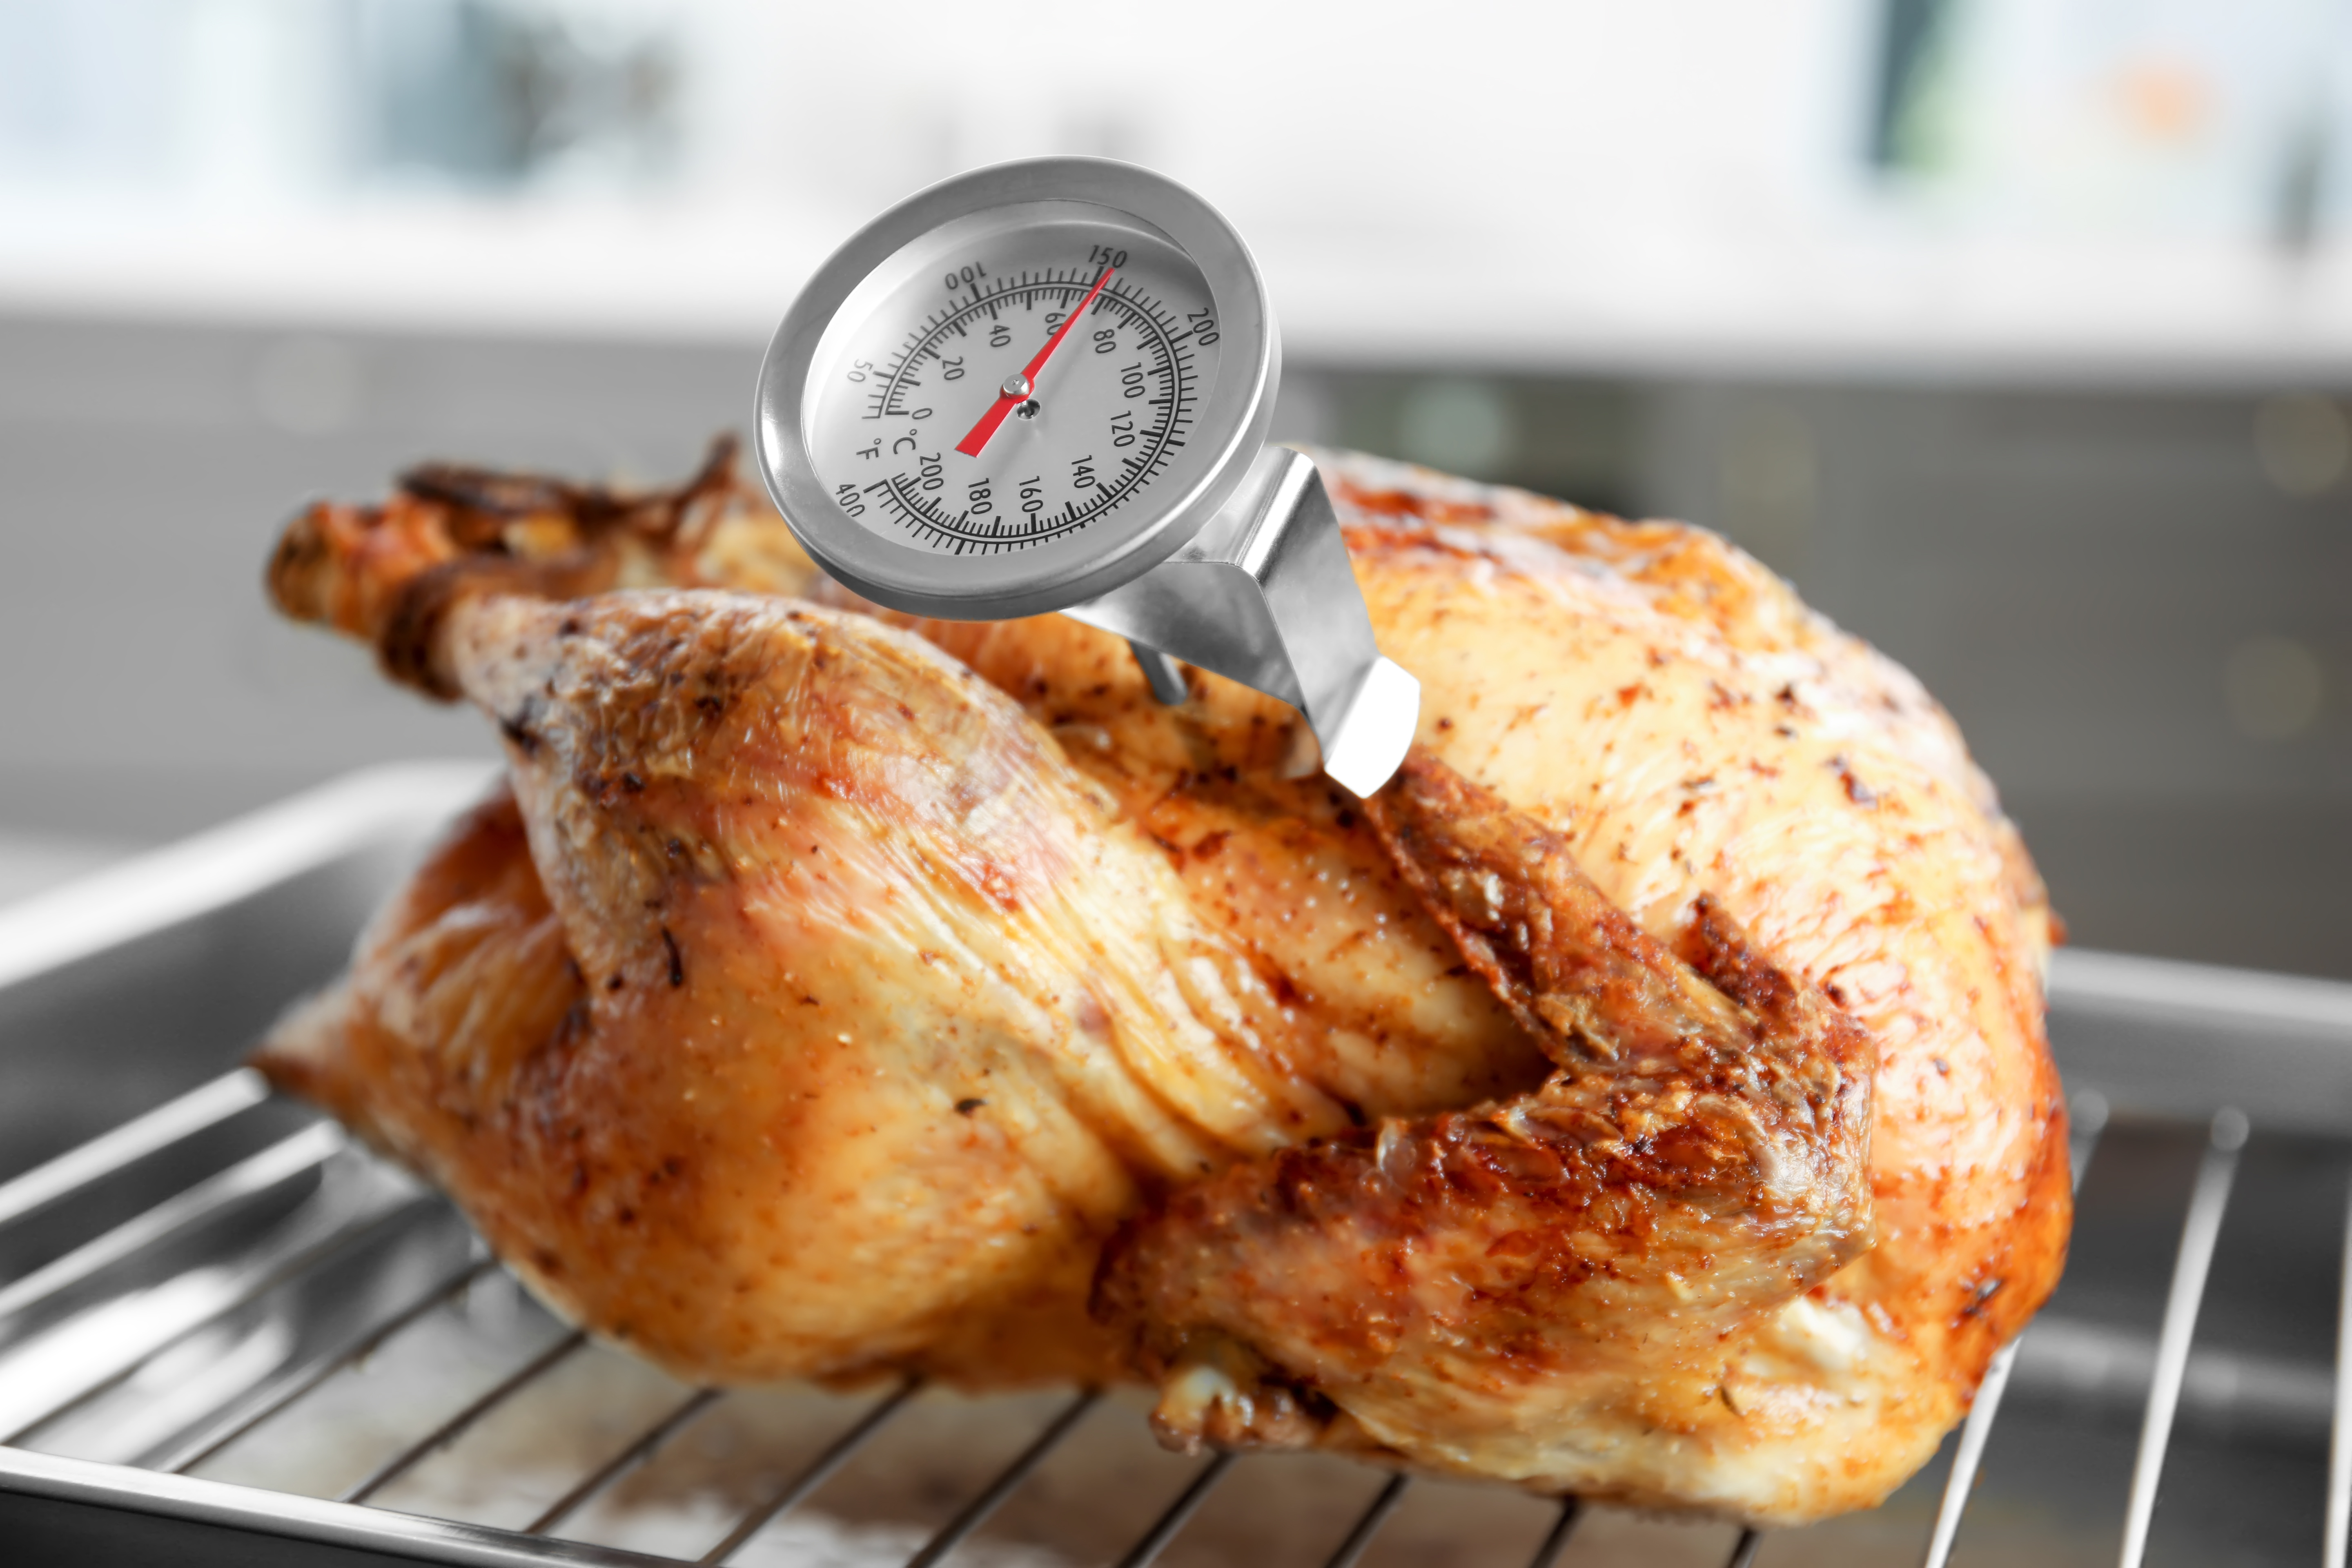 Meat Thermometer or Pop-Up Turkey Timer? - Consumer Reports